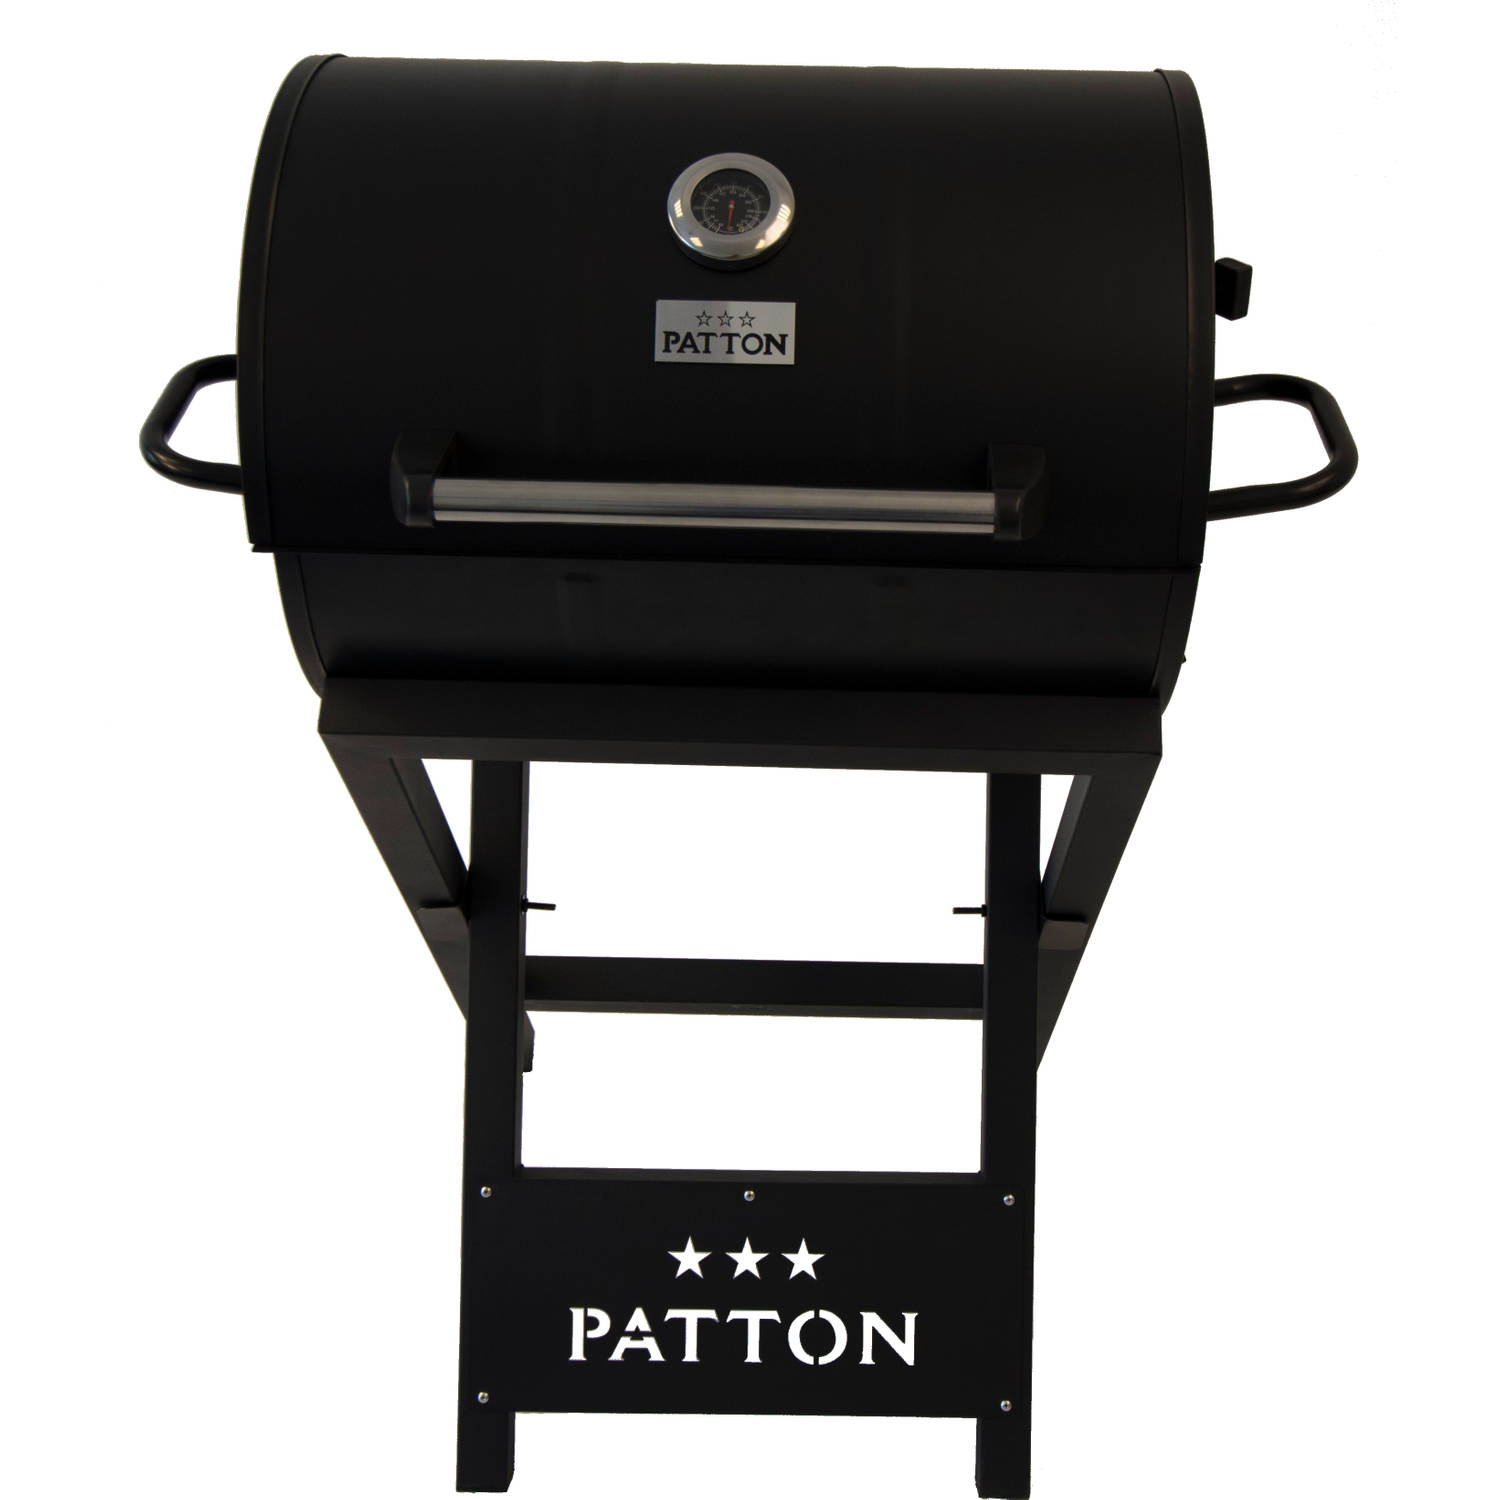 Patton barbecue grill Barrel | Blokker